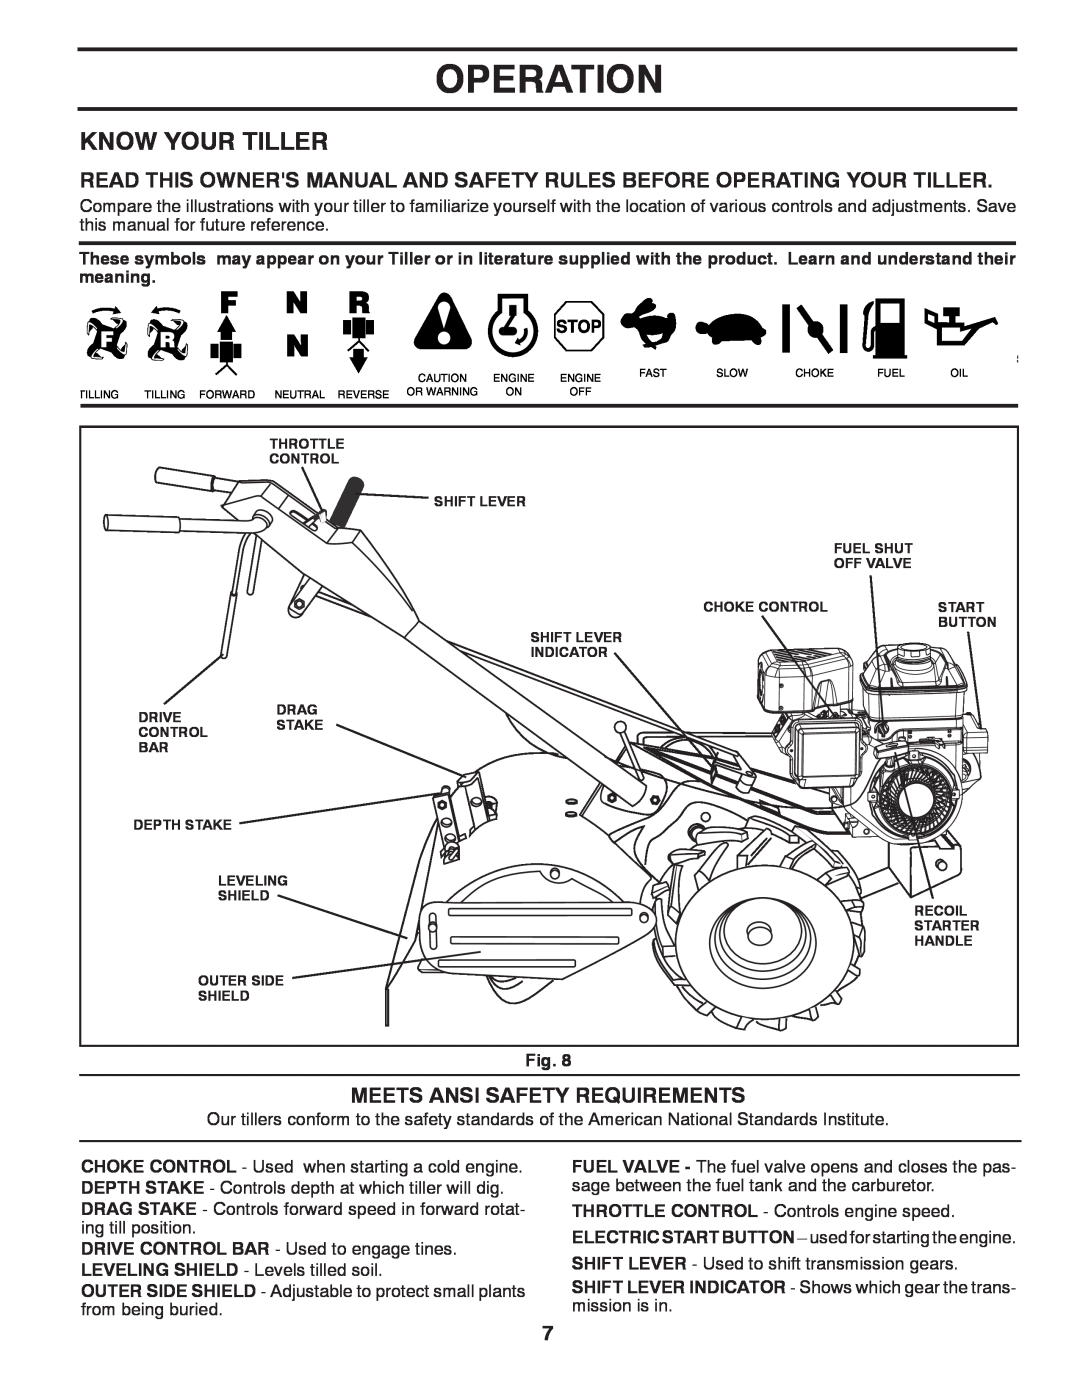 Husqvarna DRT900E owner manual Operation, Know Your Tiller, Meets Ansi Safety Requirements 